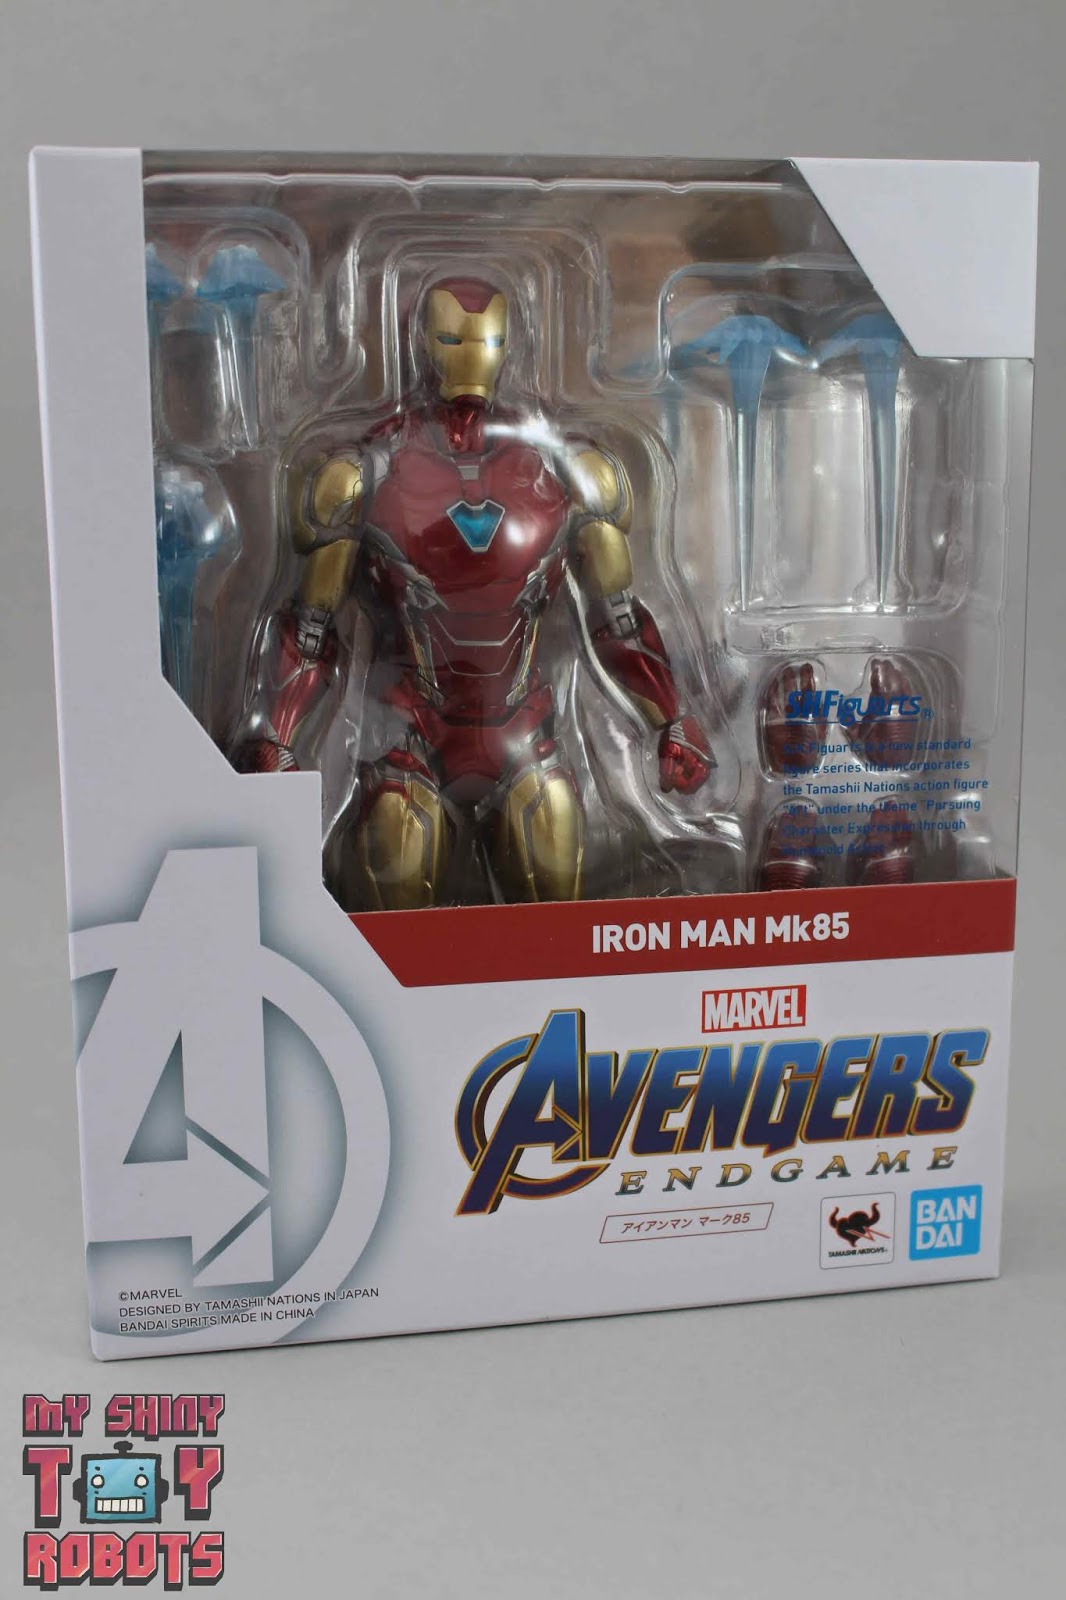 My Shiny Toy Robots: Toybox REVIEW: S.H. Figuarts Iron Man Mk